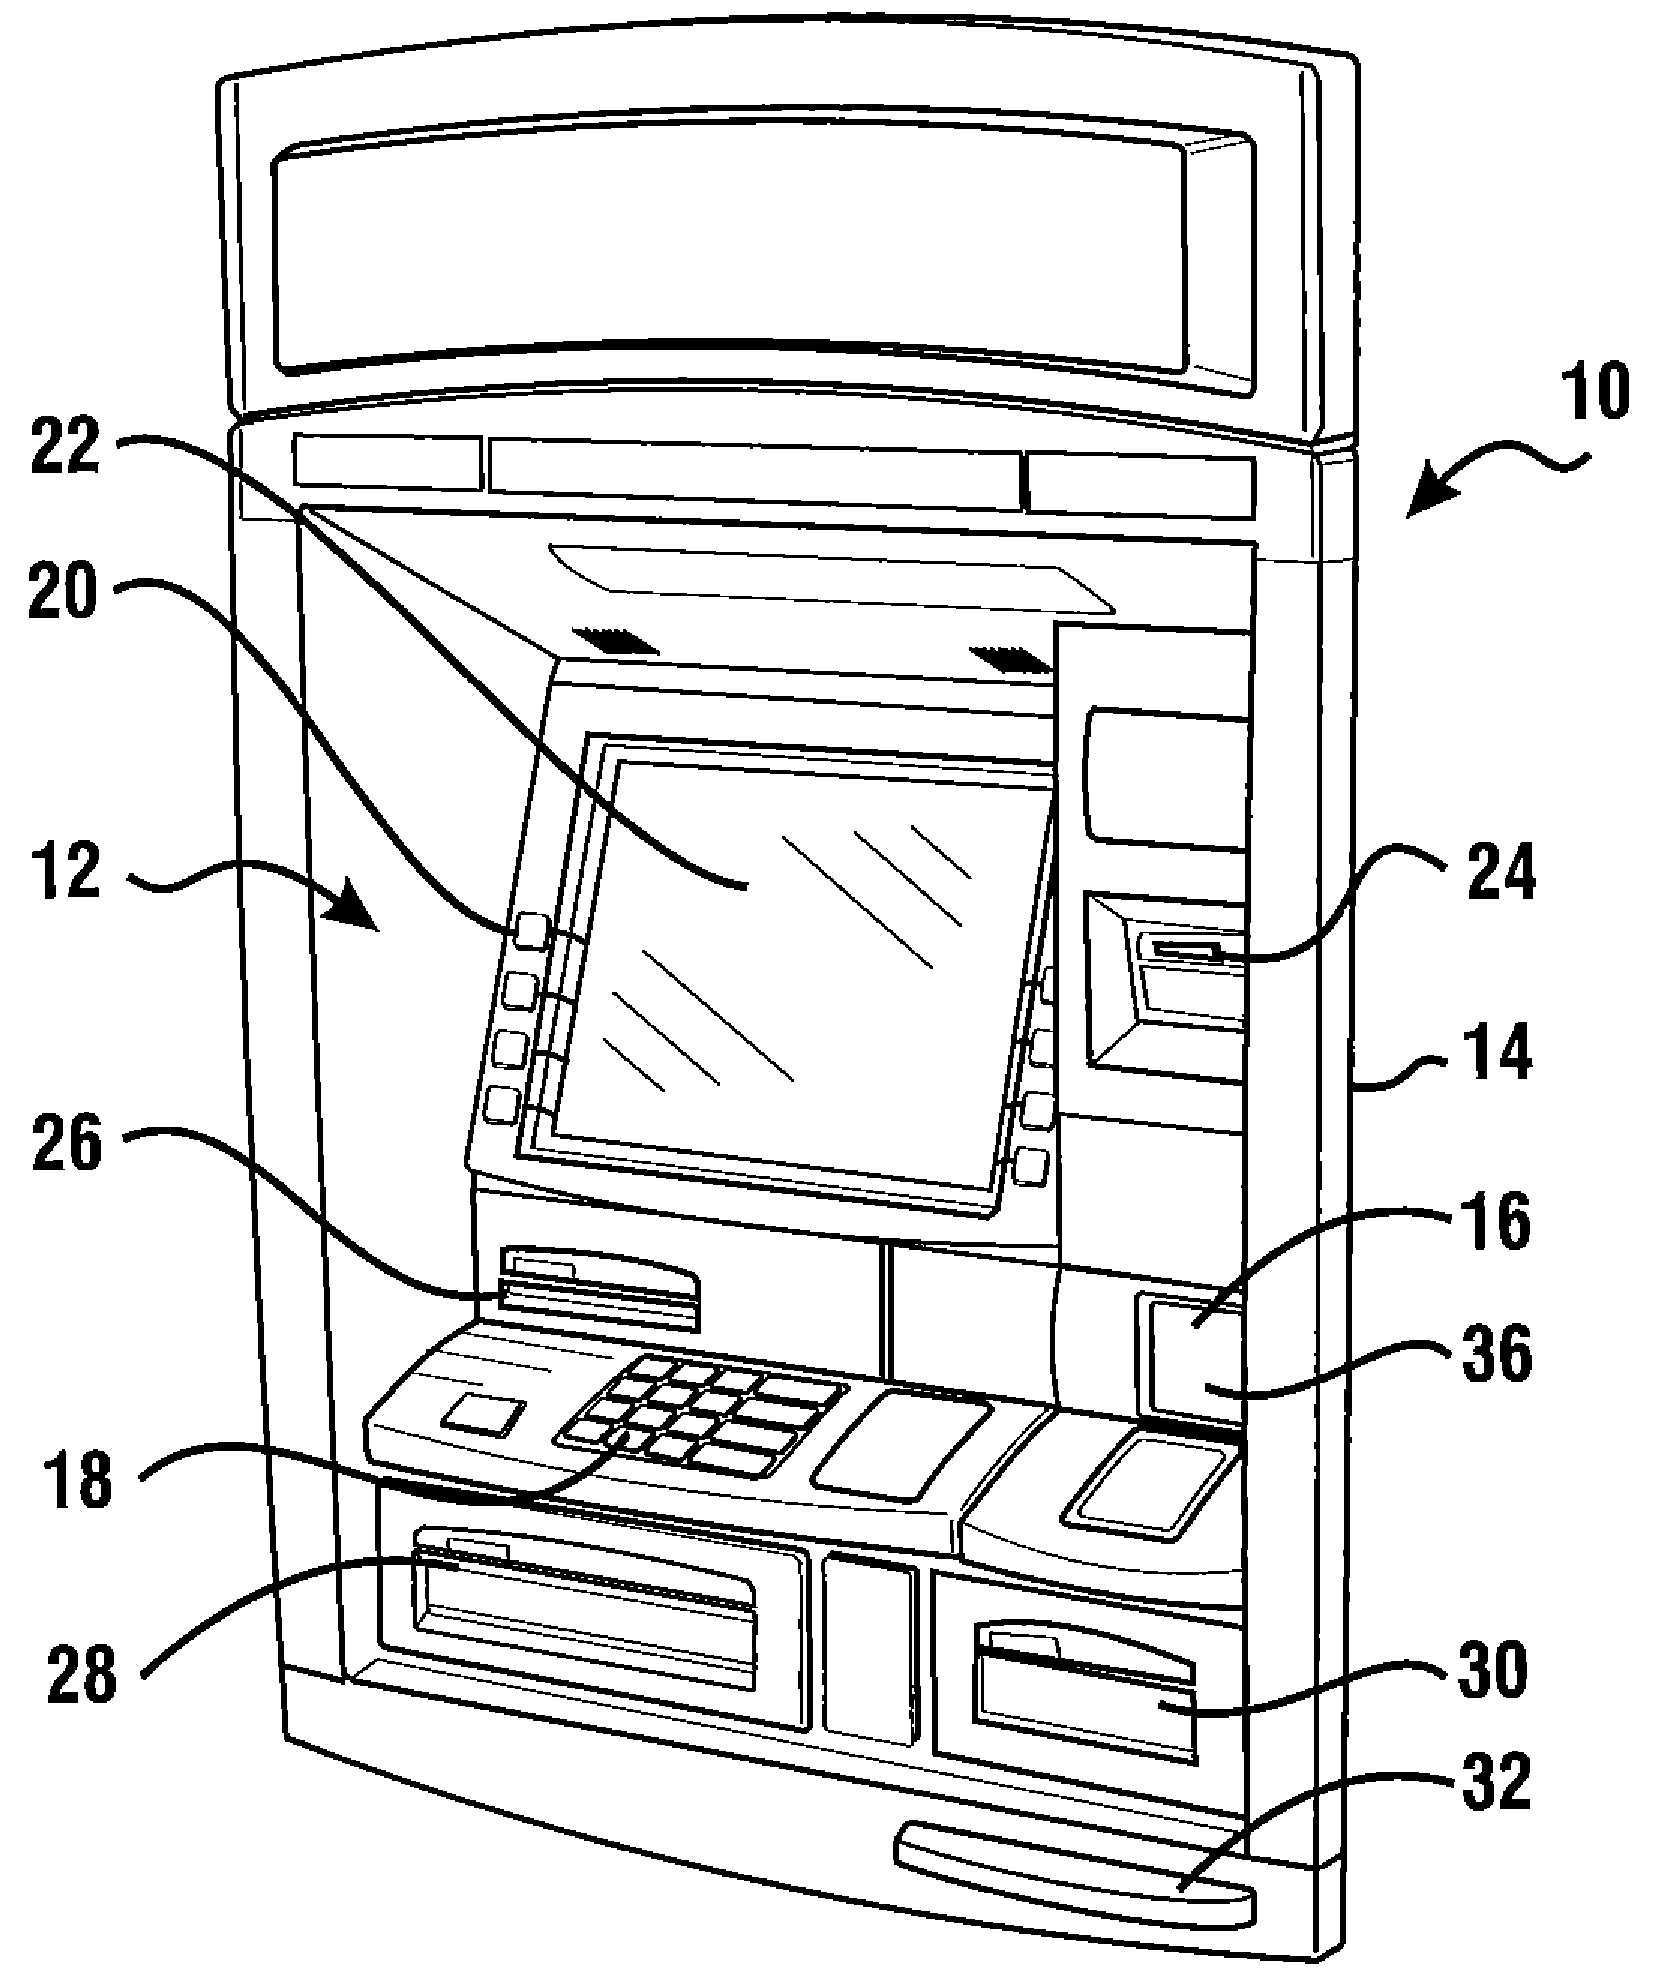 Banking machine controlled responsive to data read from data bearing records